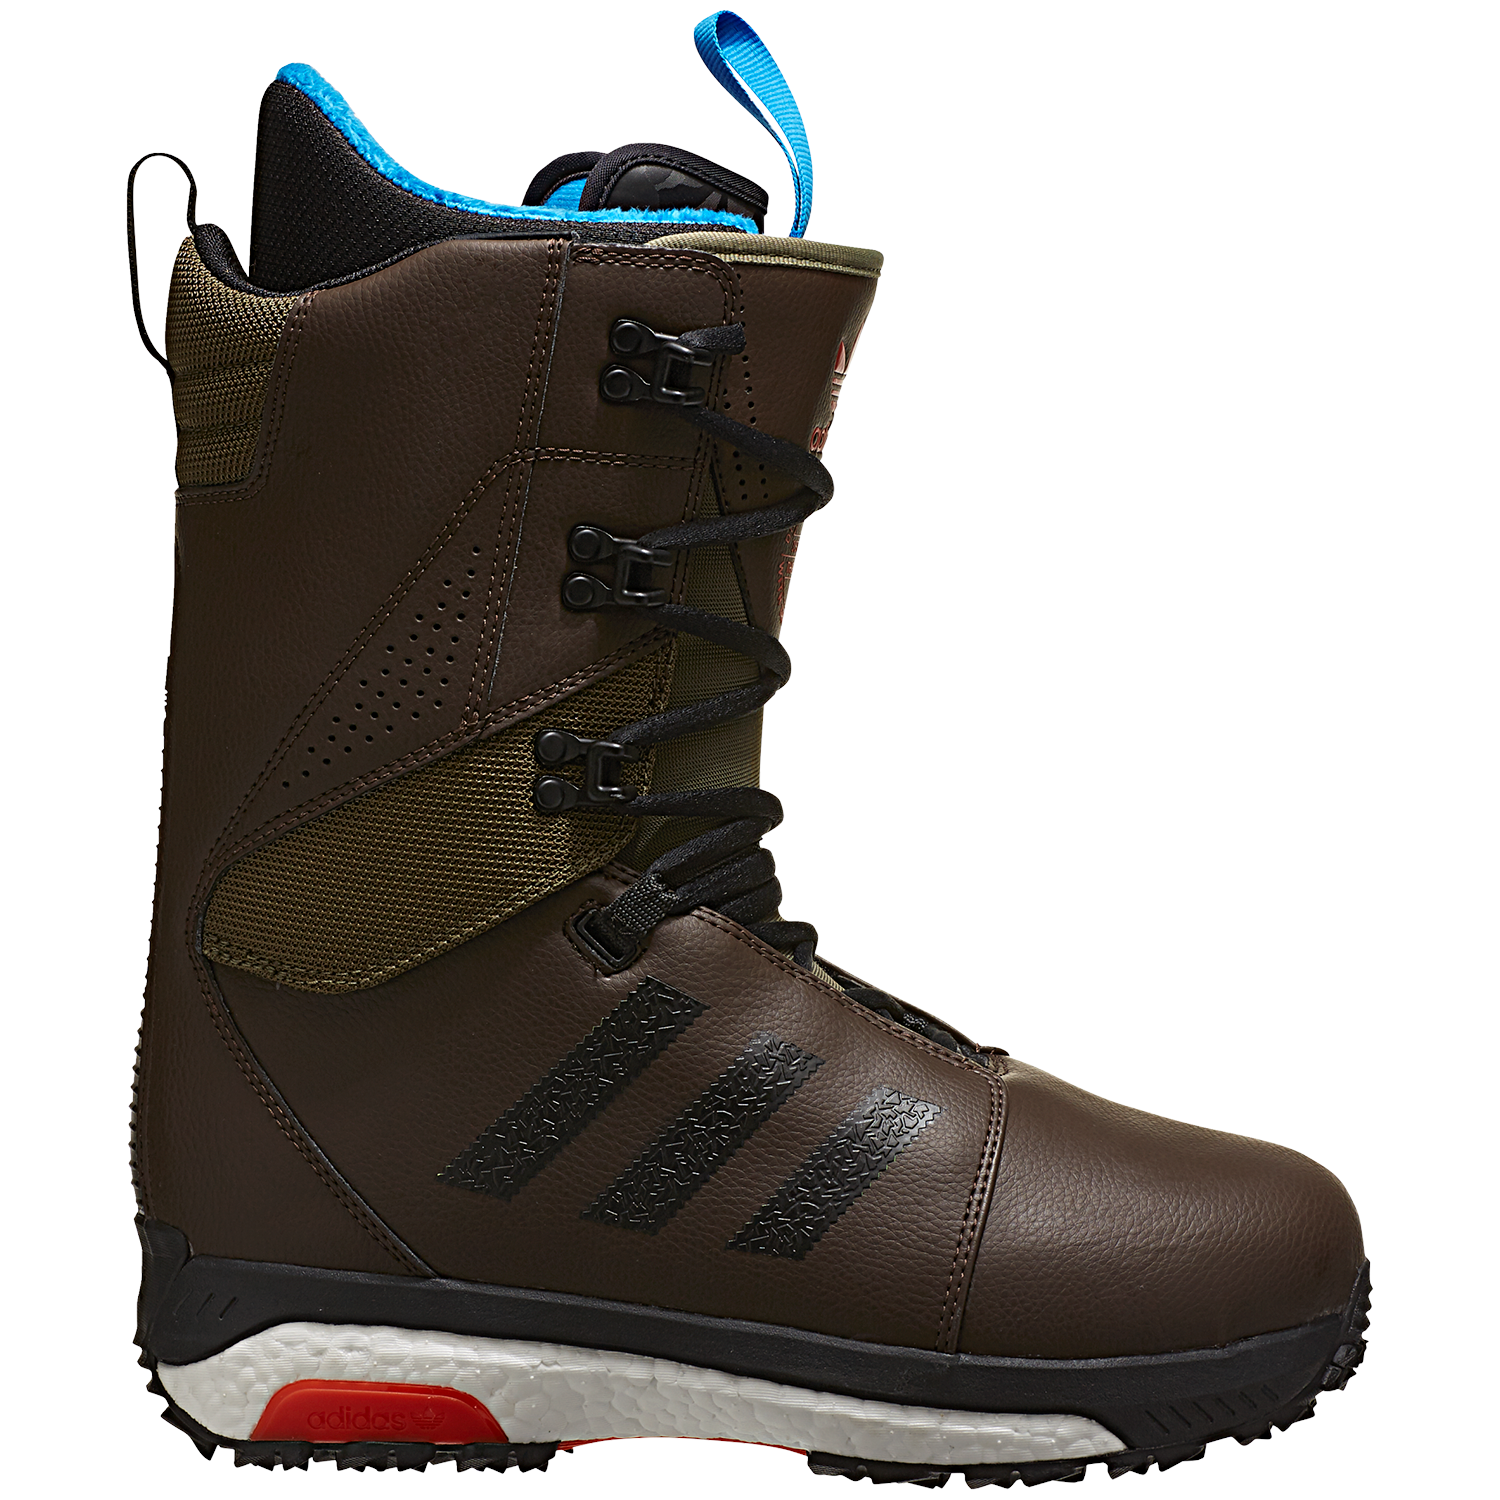 adidas boost work boots